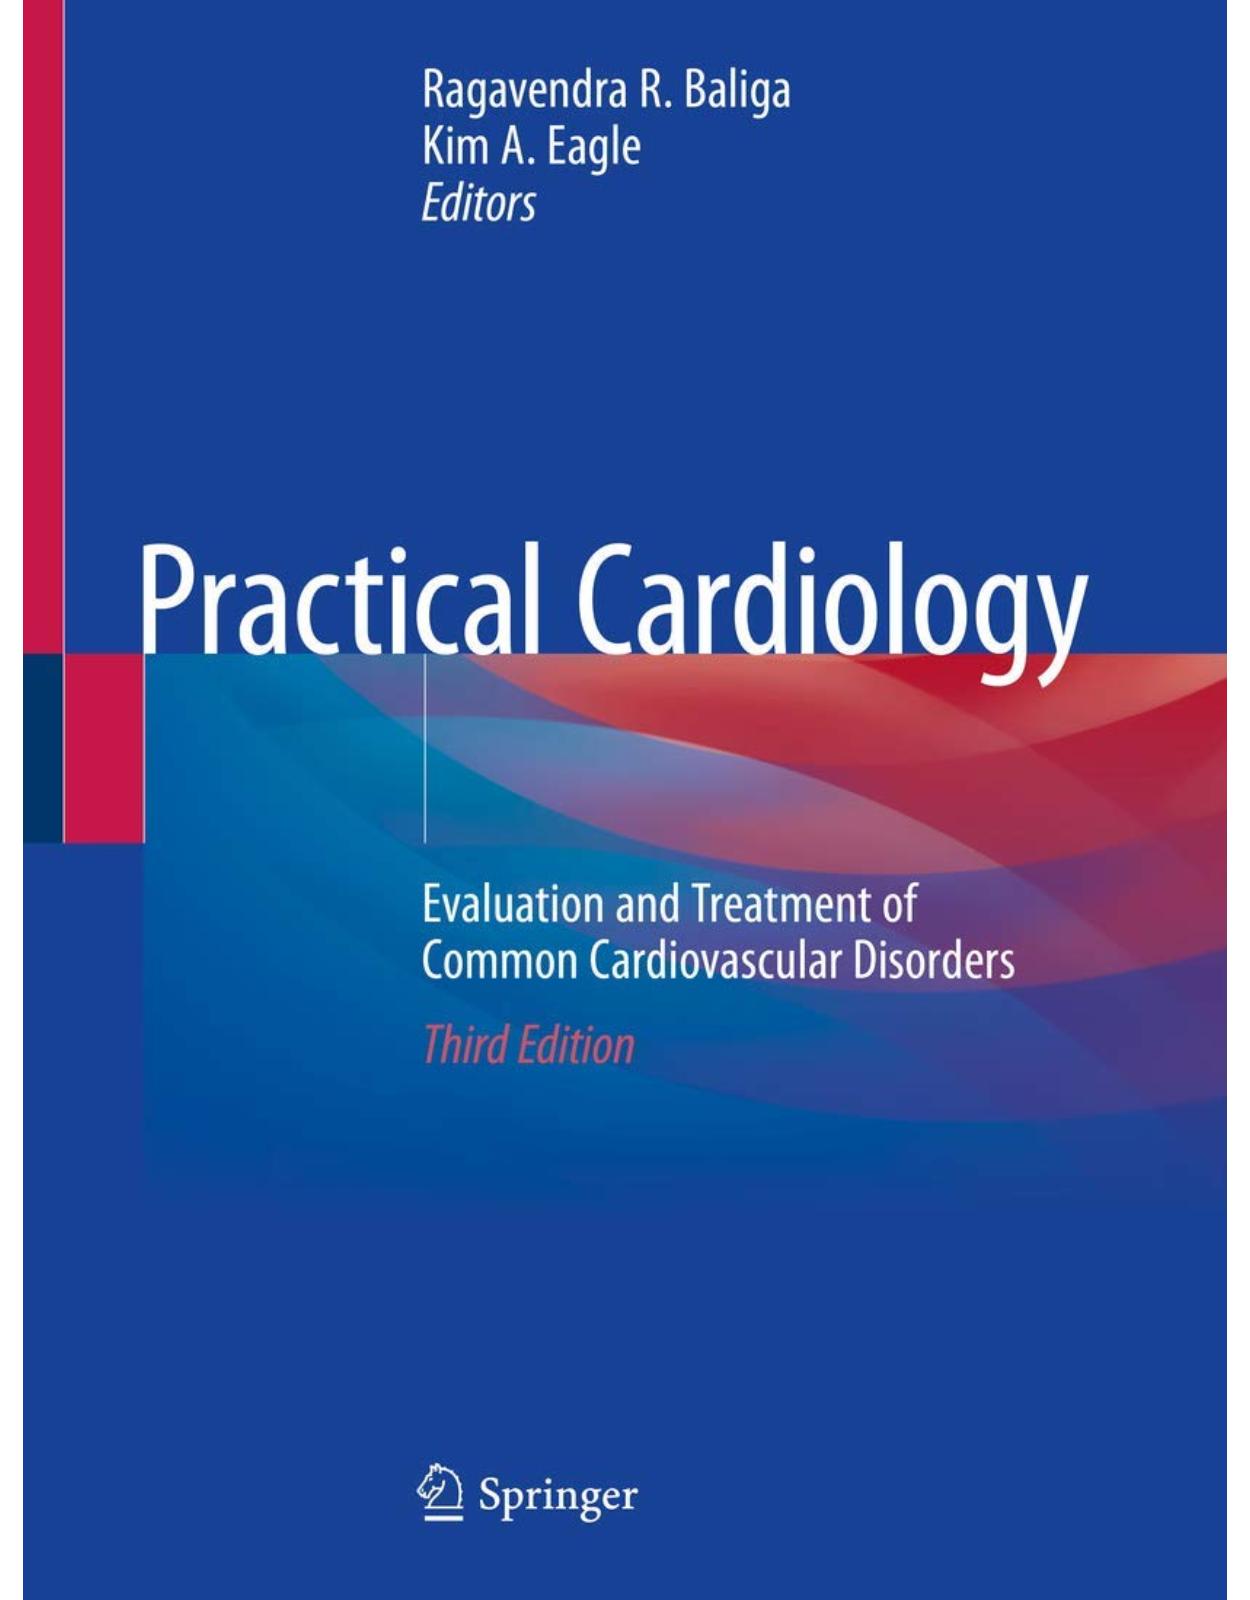 Practical Cardiology: Evaluation and Treatment of Common Cardiovascular Disorders